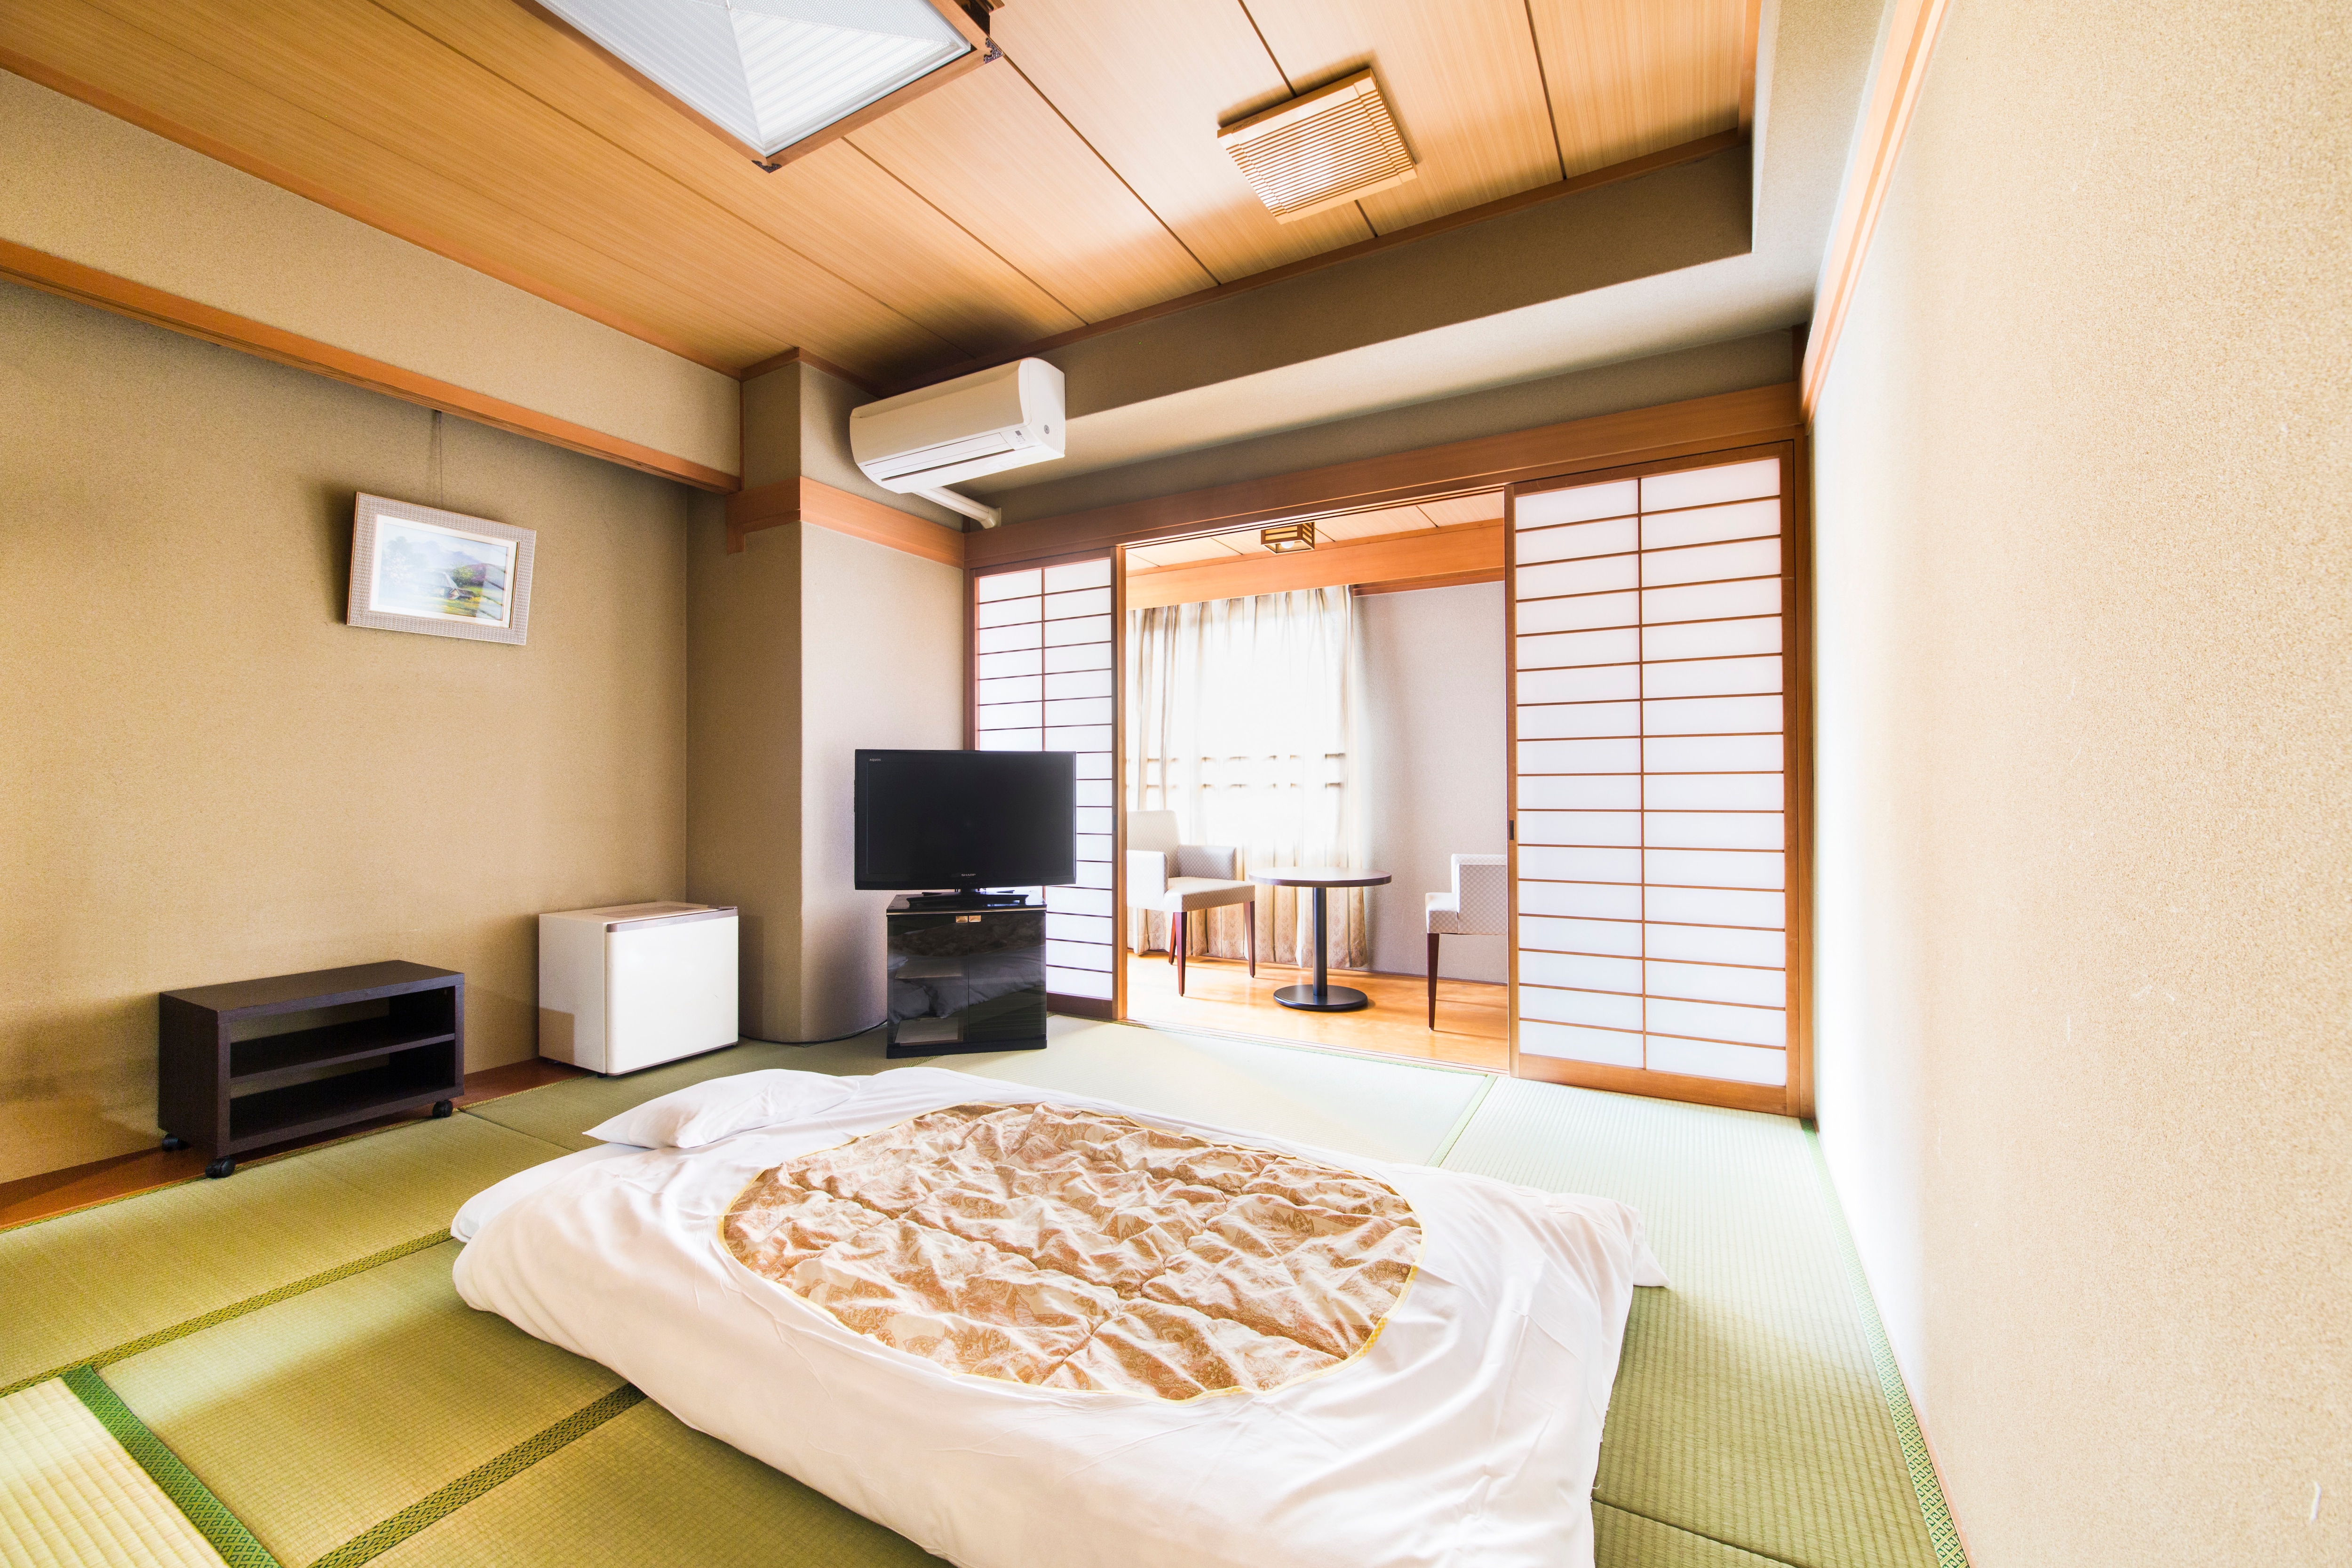 Japanese-style room 8 tatami mats can accommodate 2 to 3 people